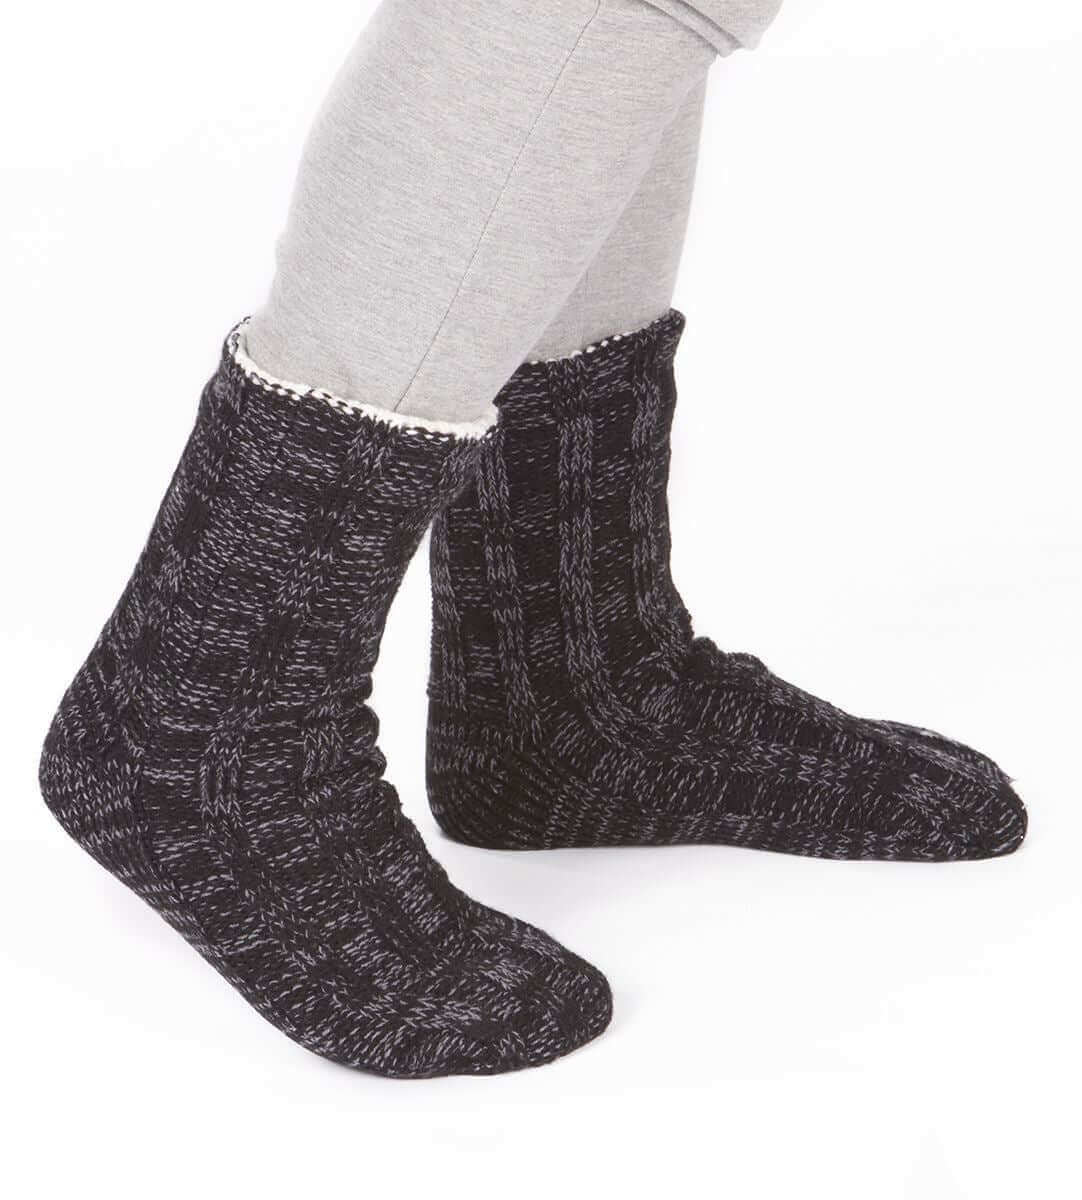 Men's Chunky Lounge Slipper Socks Non-Skid Gripper Winter Socks Gift, 4.9 TOG. Buy now for £8.00. A Socks by Sock Stack. 6-11, acrylic, athletics, black, black fair isle, boot, boys, camping, christmas, chunky lounge, comfortable, cosy, gift, grey, home,